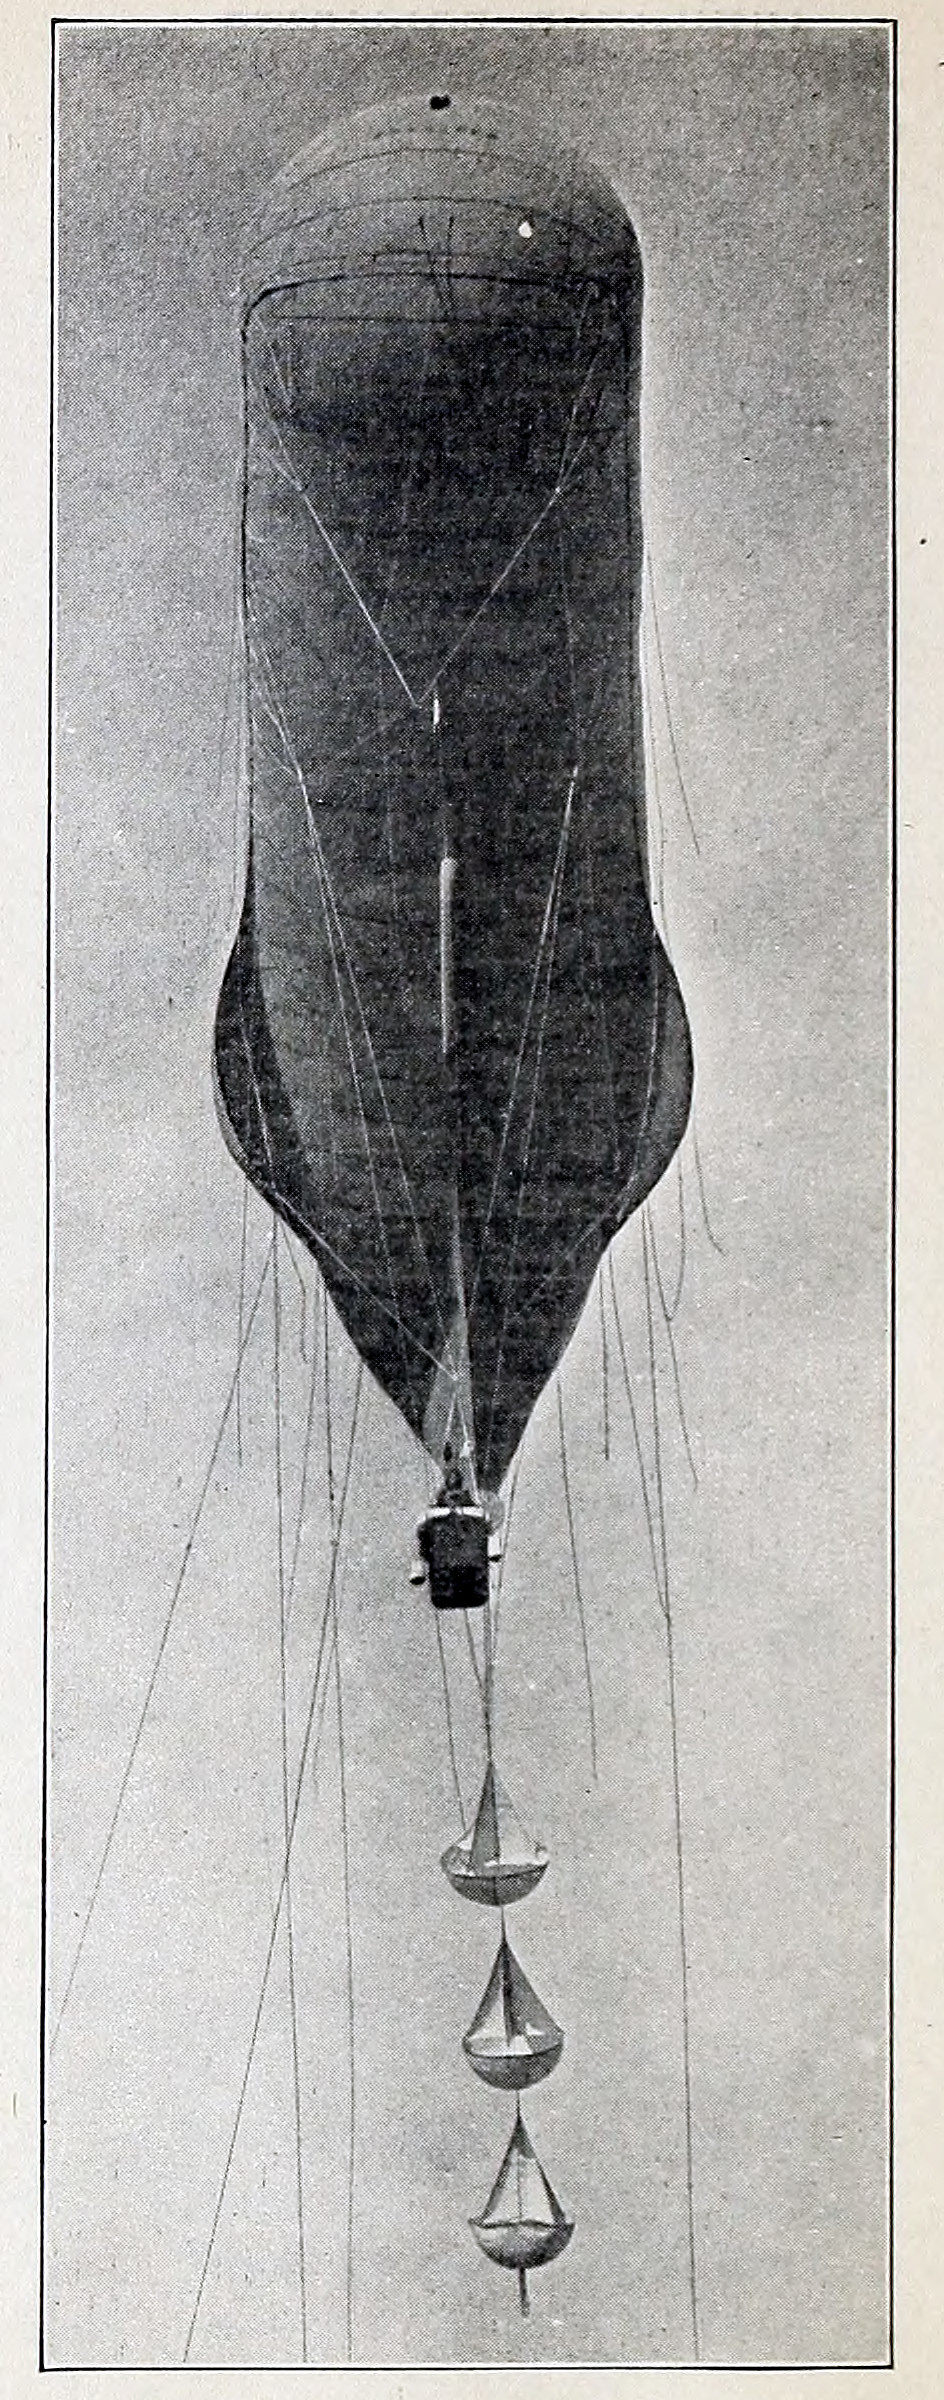 Fig. 25. Head-On View of Modern Kite Balloon, Showing Details of Tail Buckets